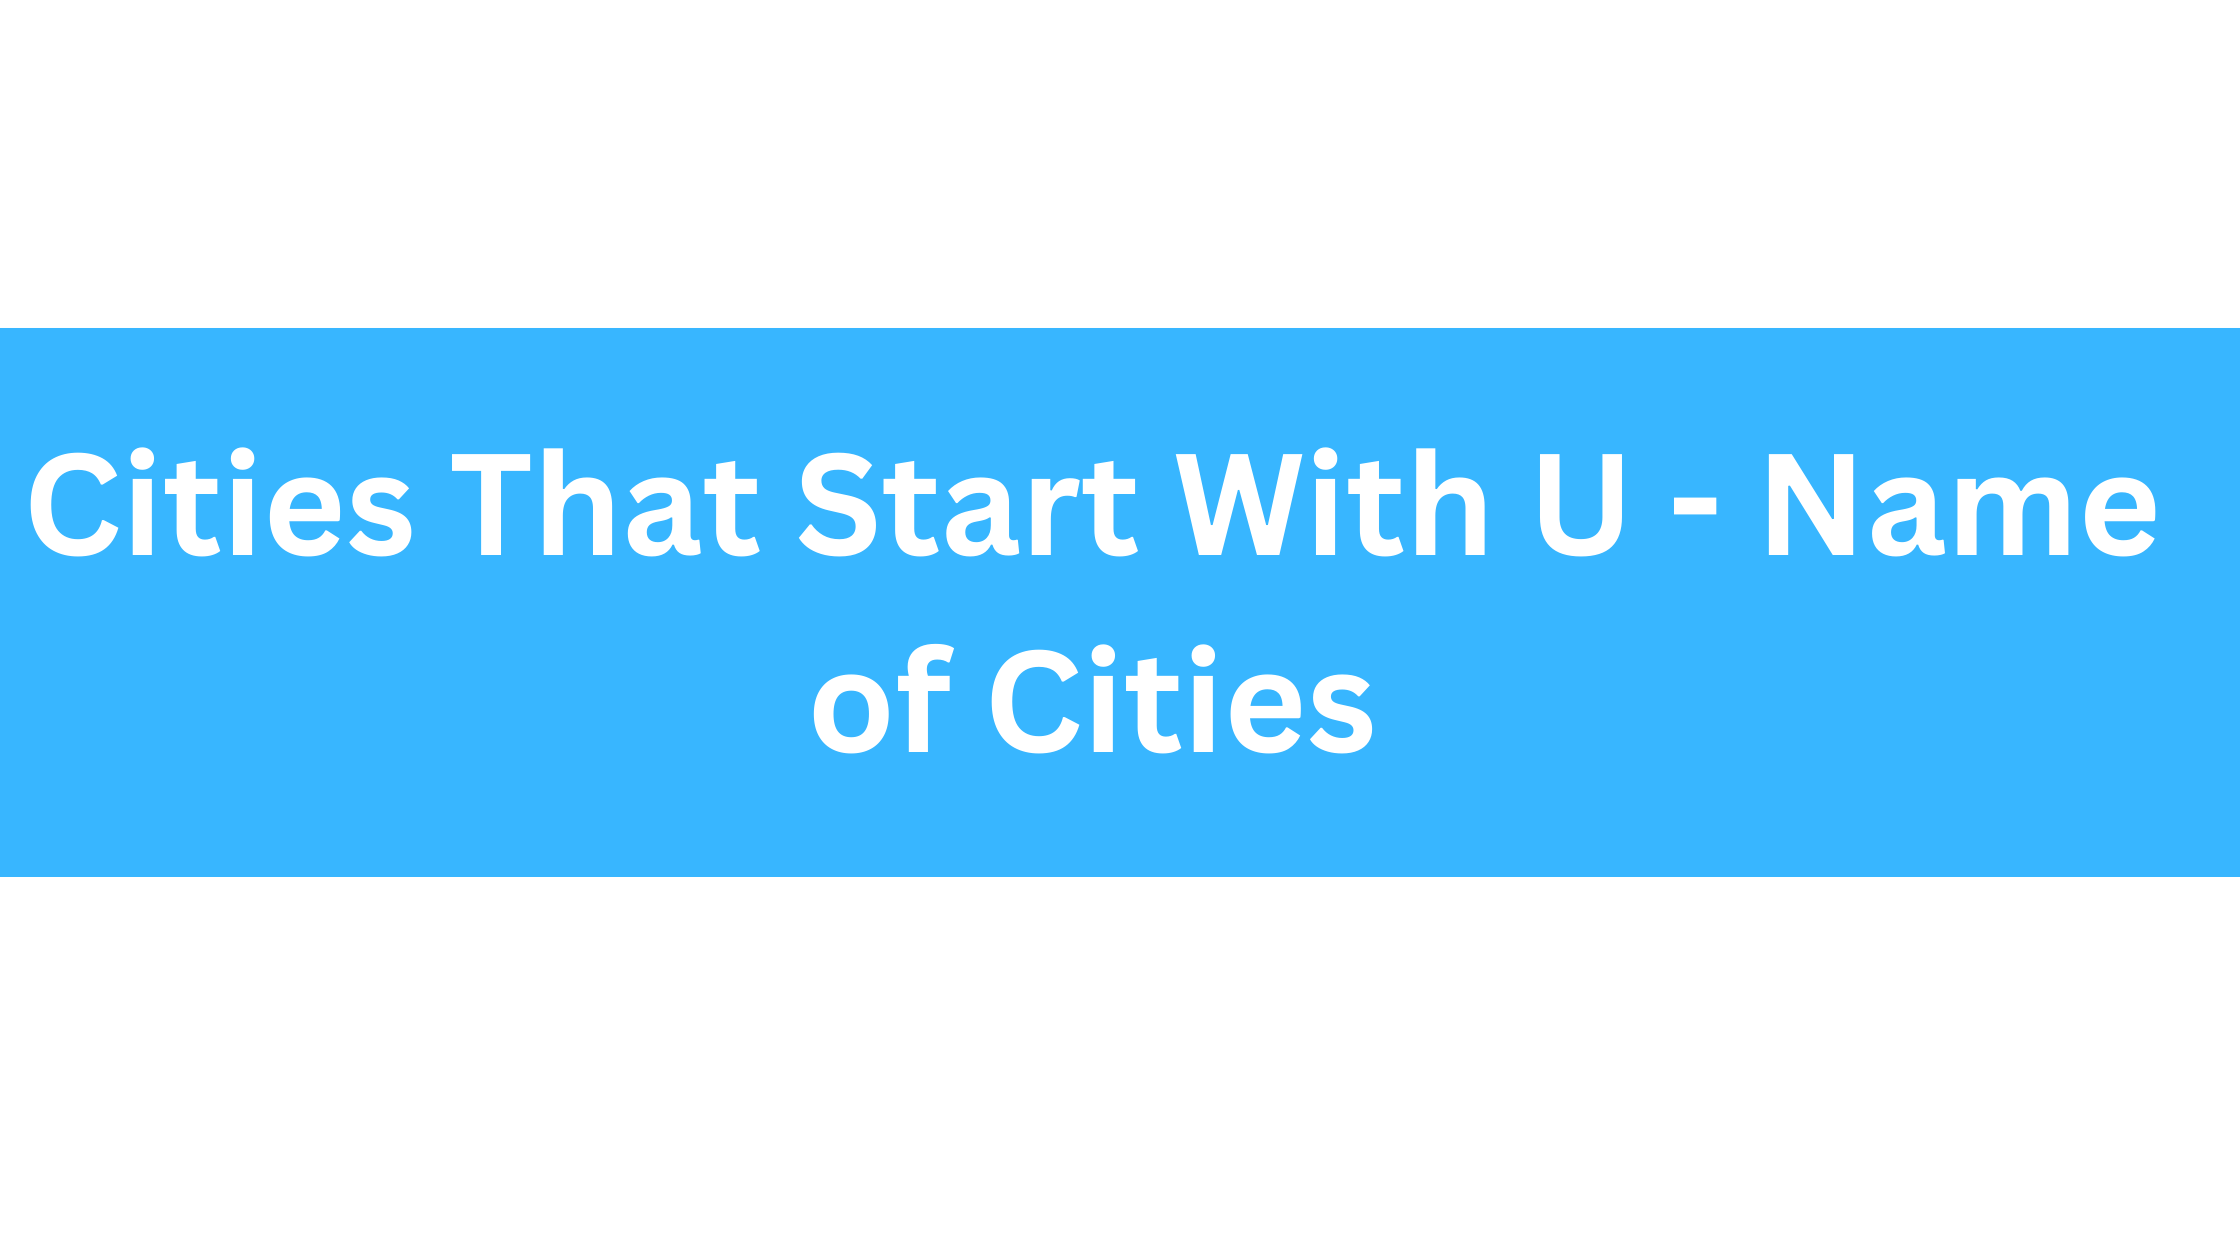 Cities That Start With U